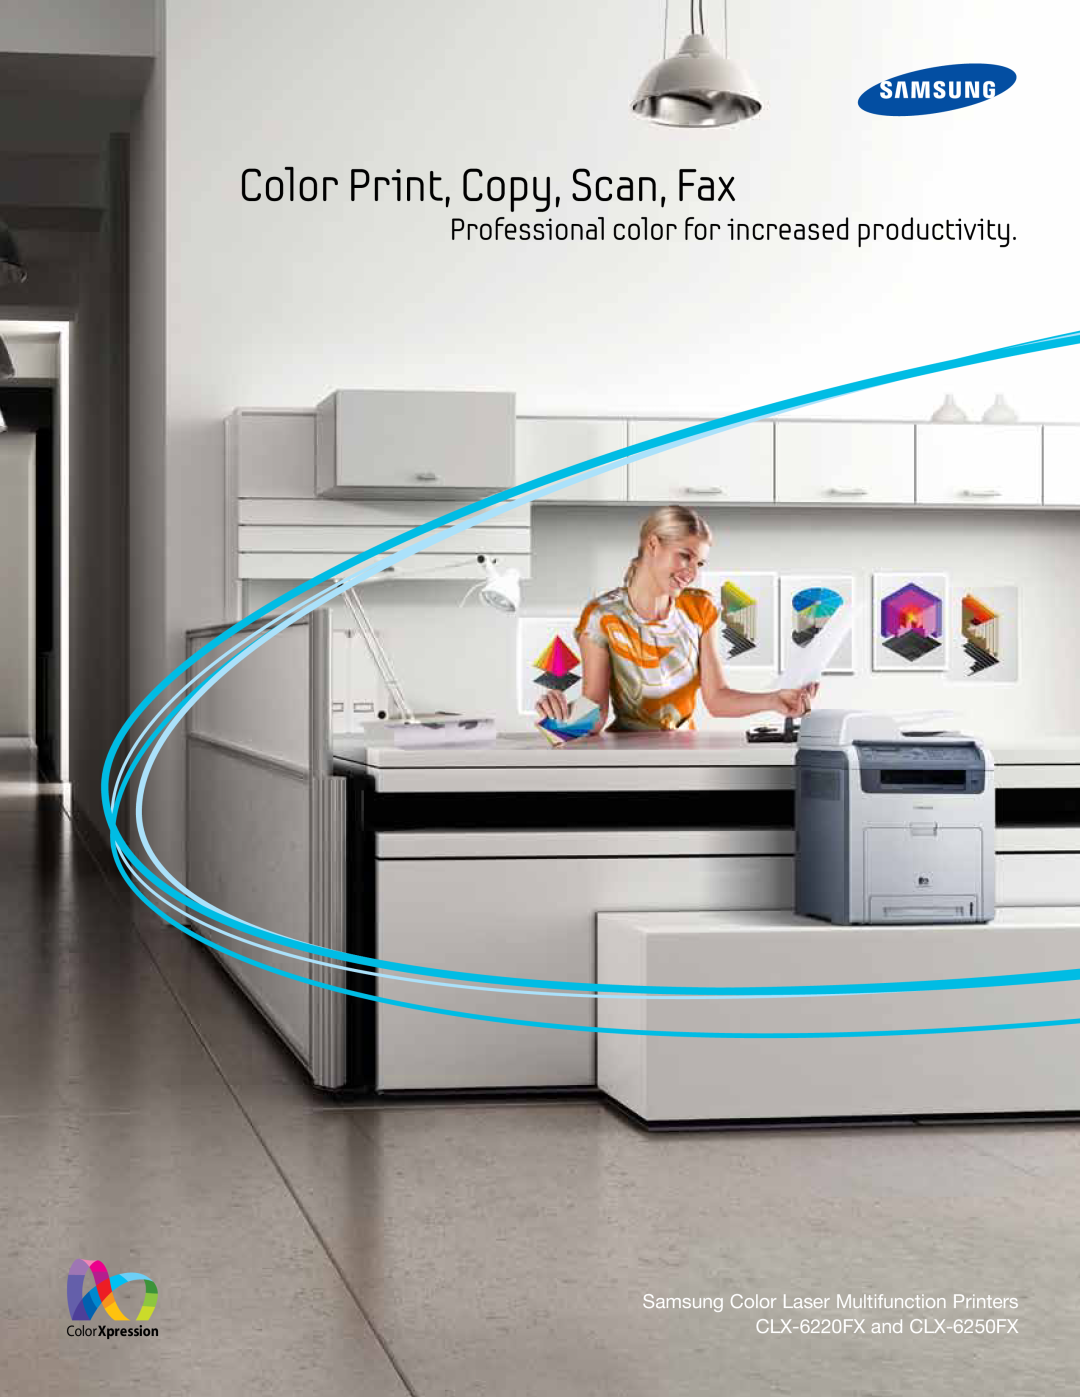 Samsung manual Color Print, Copy, Scan, Fax, Professional color for increased productivity, CLX-6220FX and CLX-6250FX 